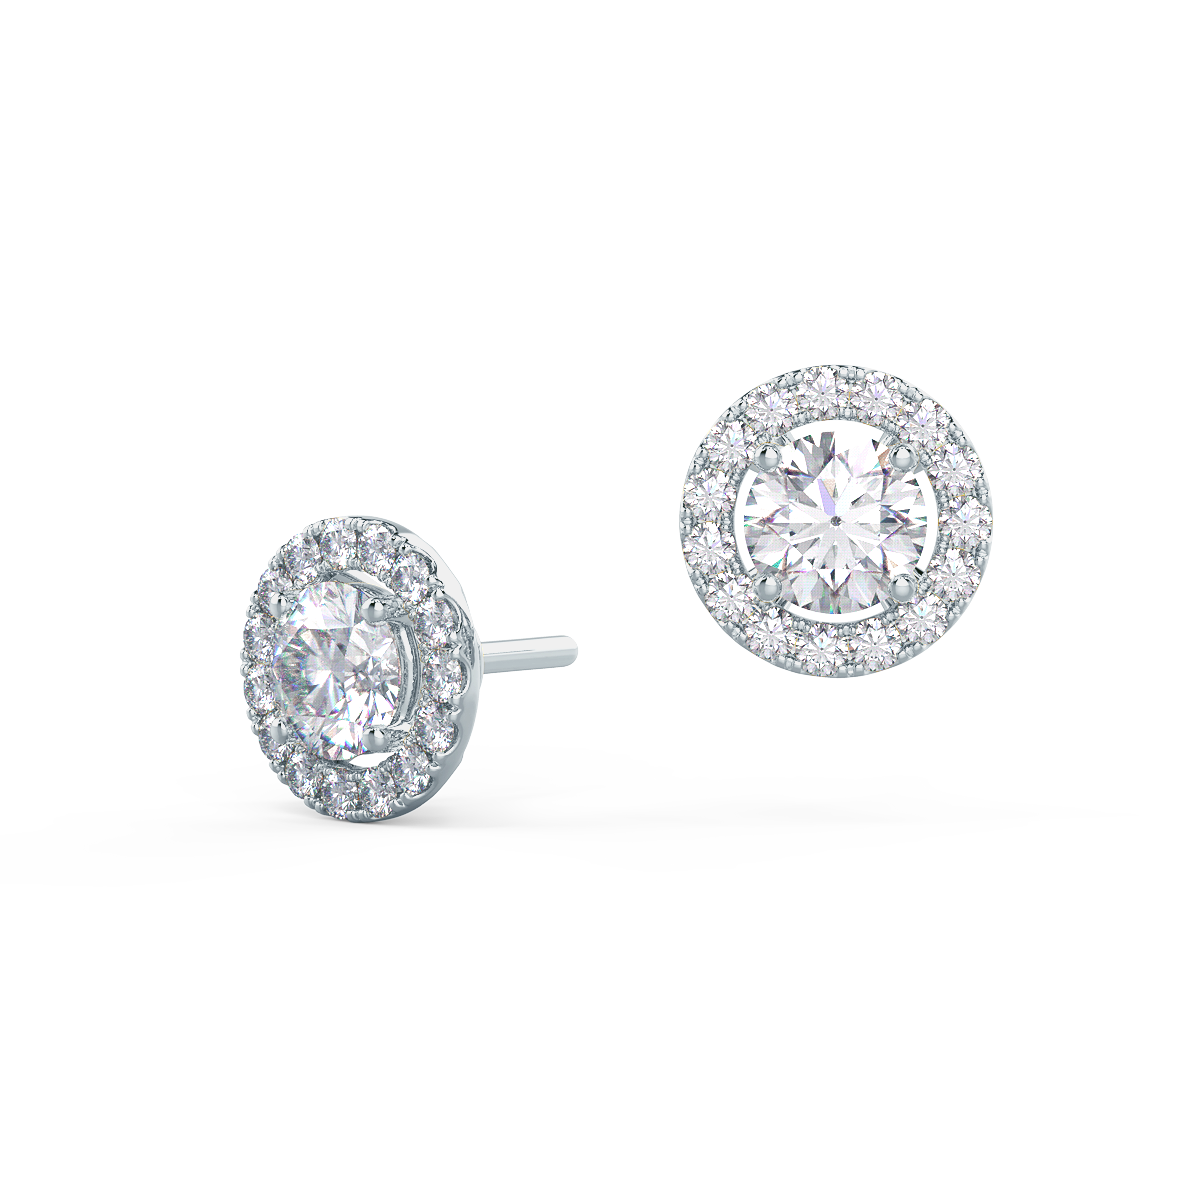 Tiffany & Co. Retired Diamond Earring Jackets in Platinum | New York  Jewelers Chicago